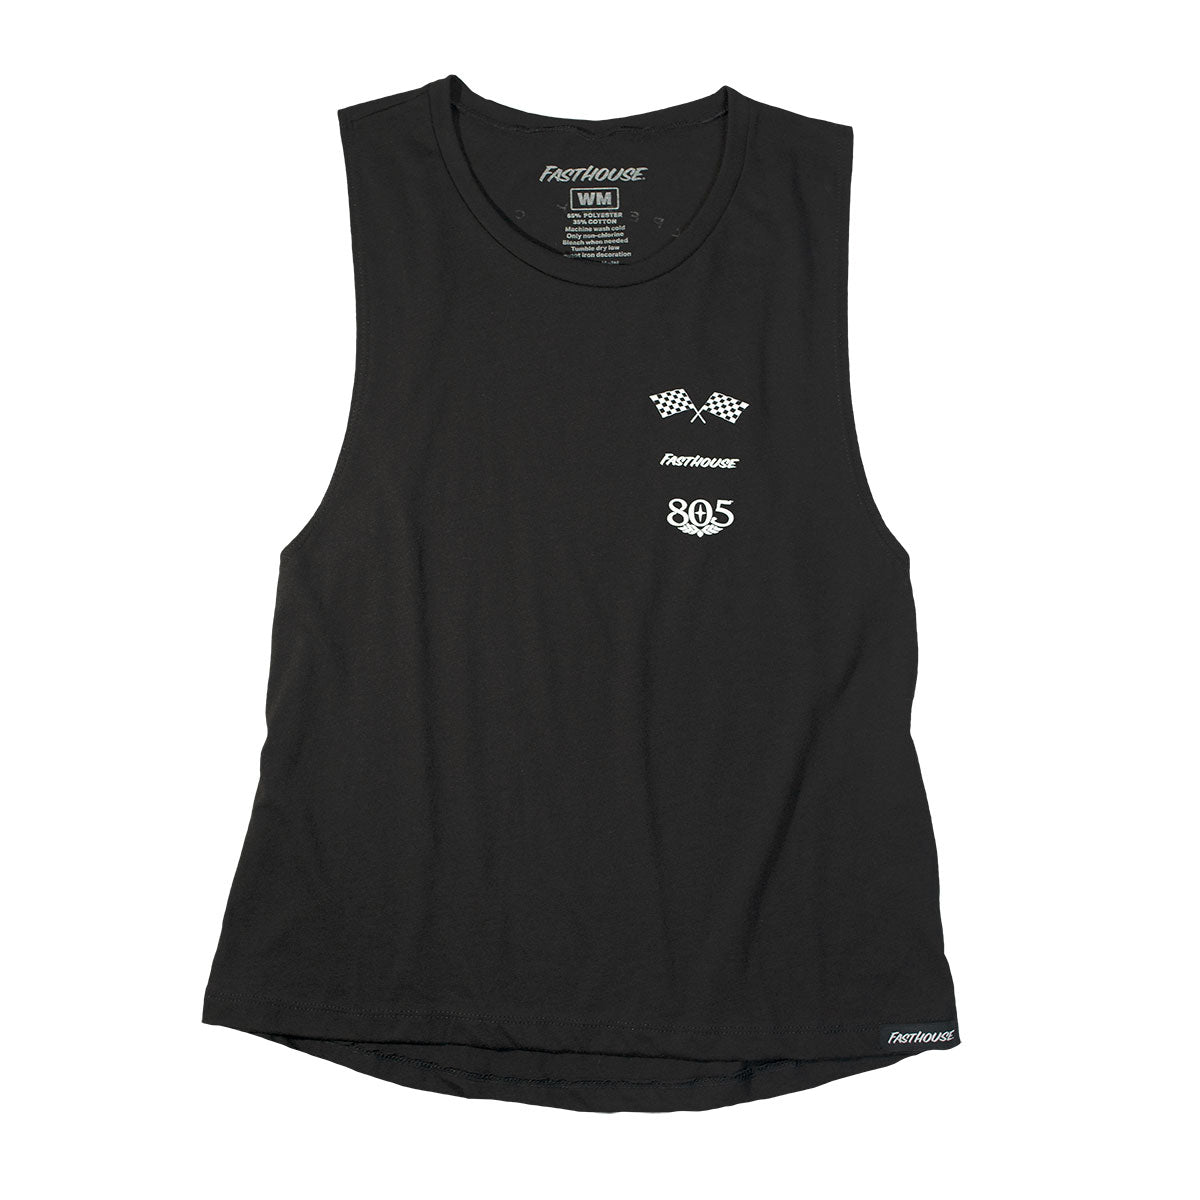 Fasthouse - 805 Prime Womens Muscle Tank - Black